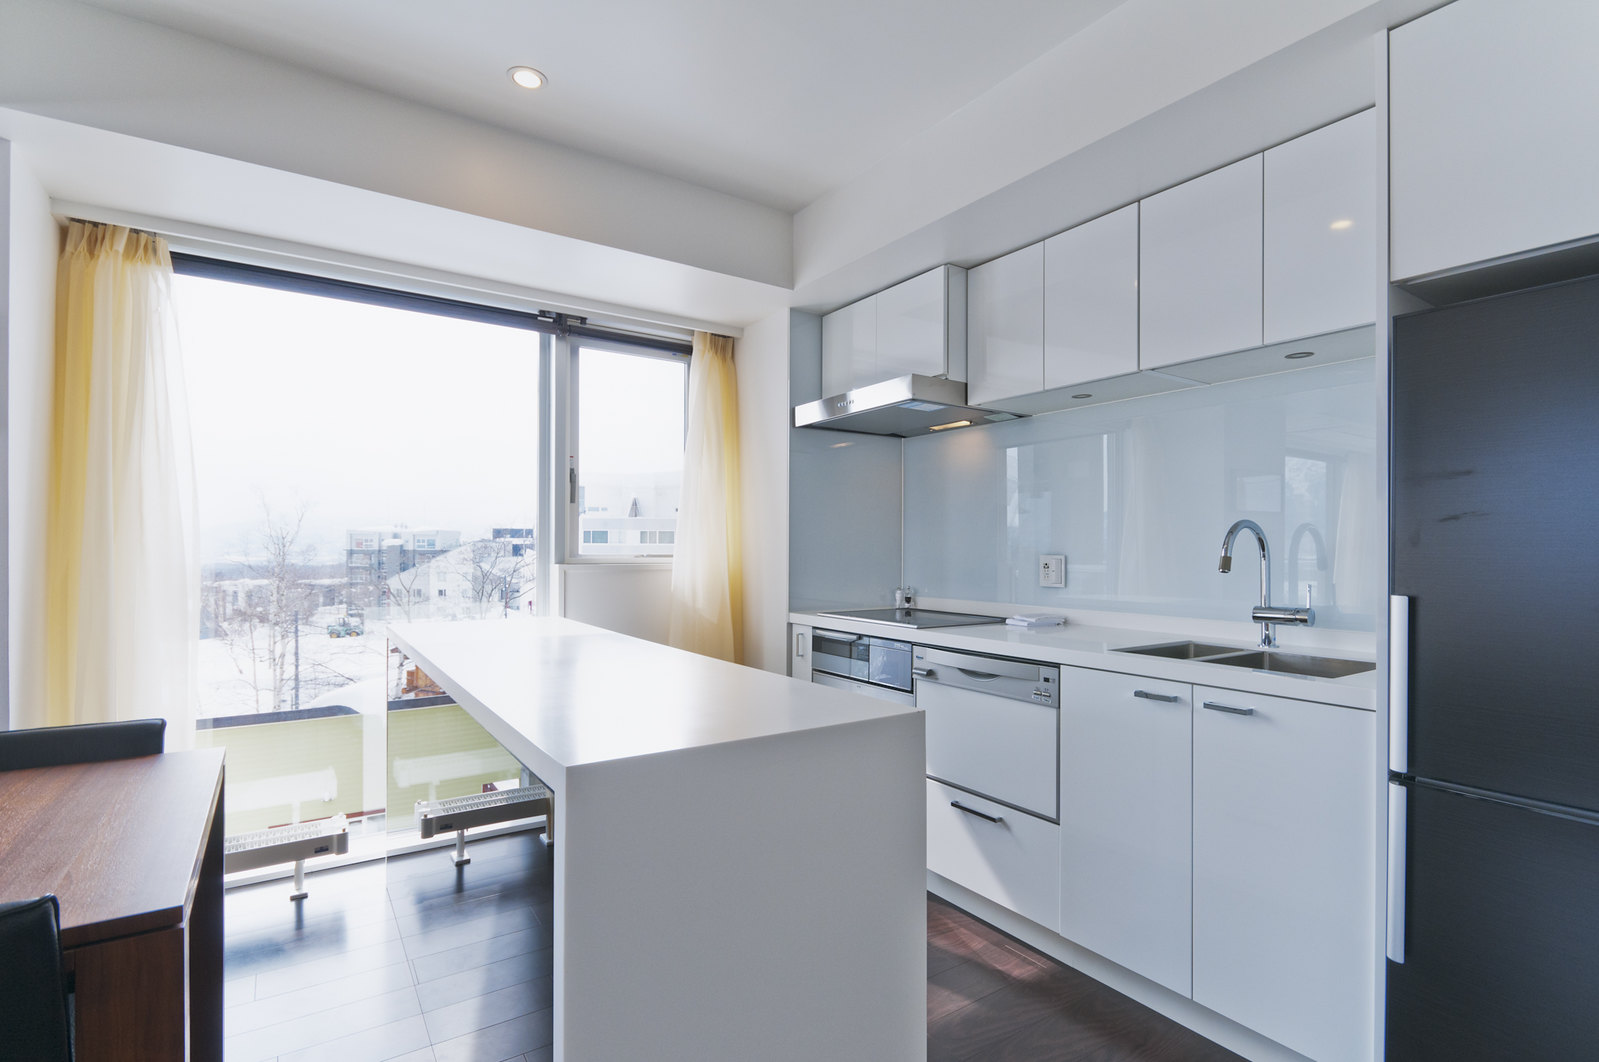 The fully furnished kitchen in a 2 bedroom Premium apartment in Kizuna, Niseko.